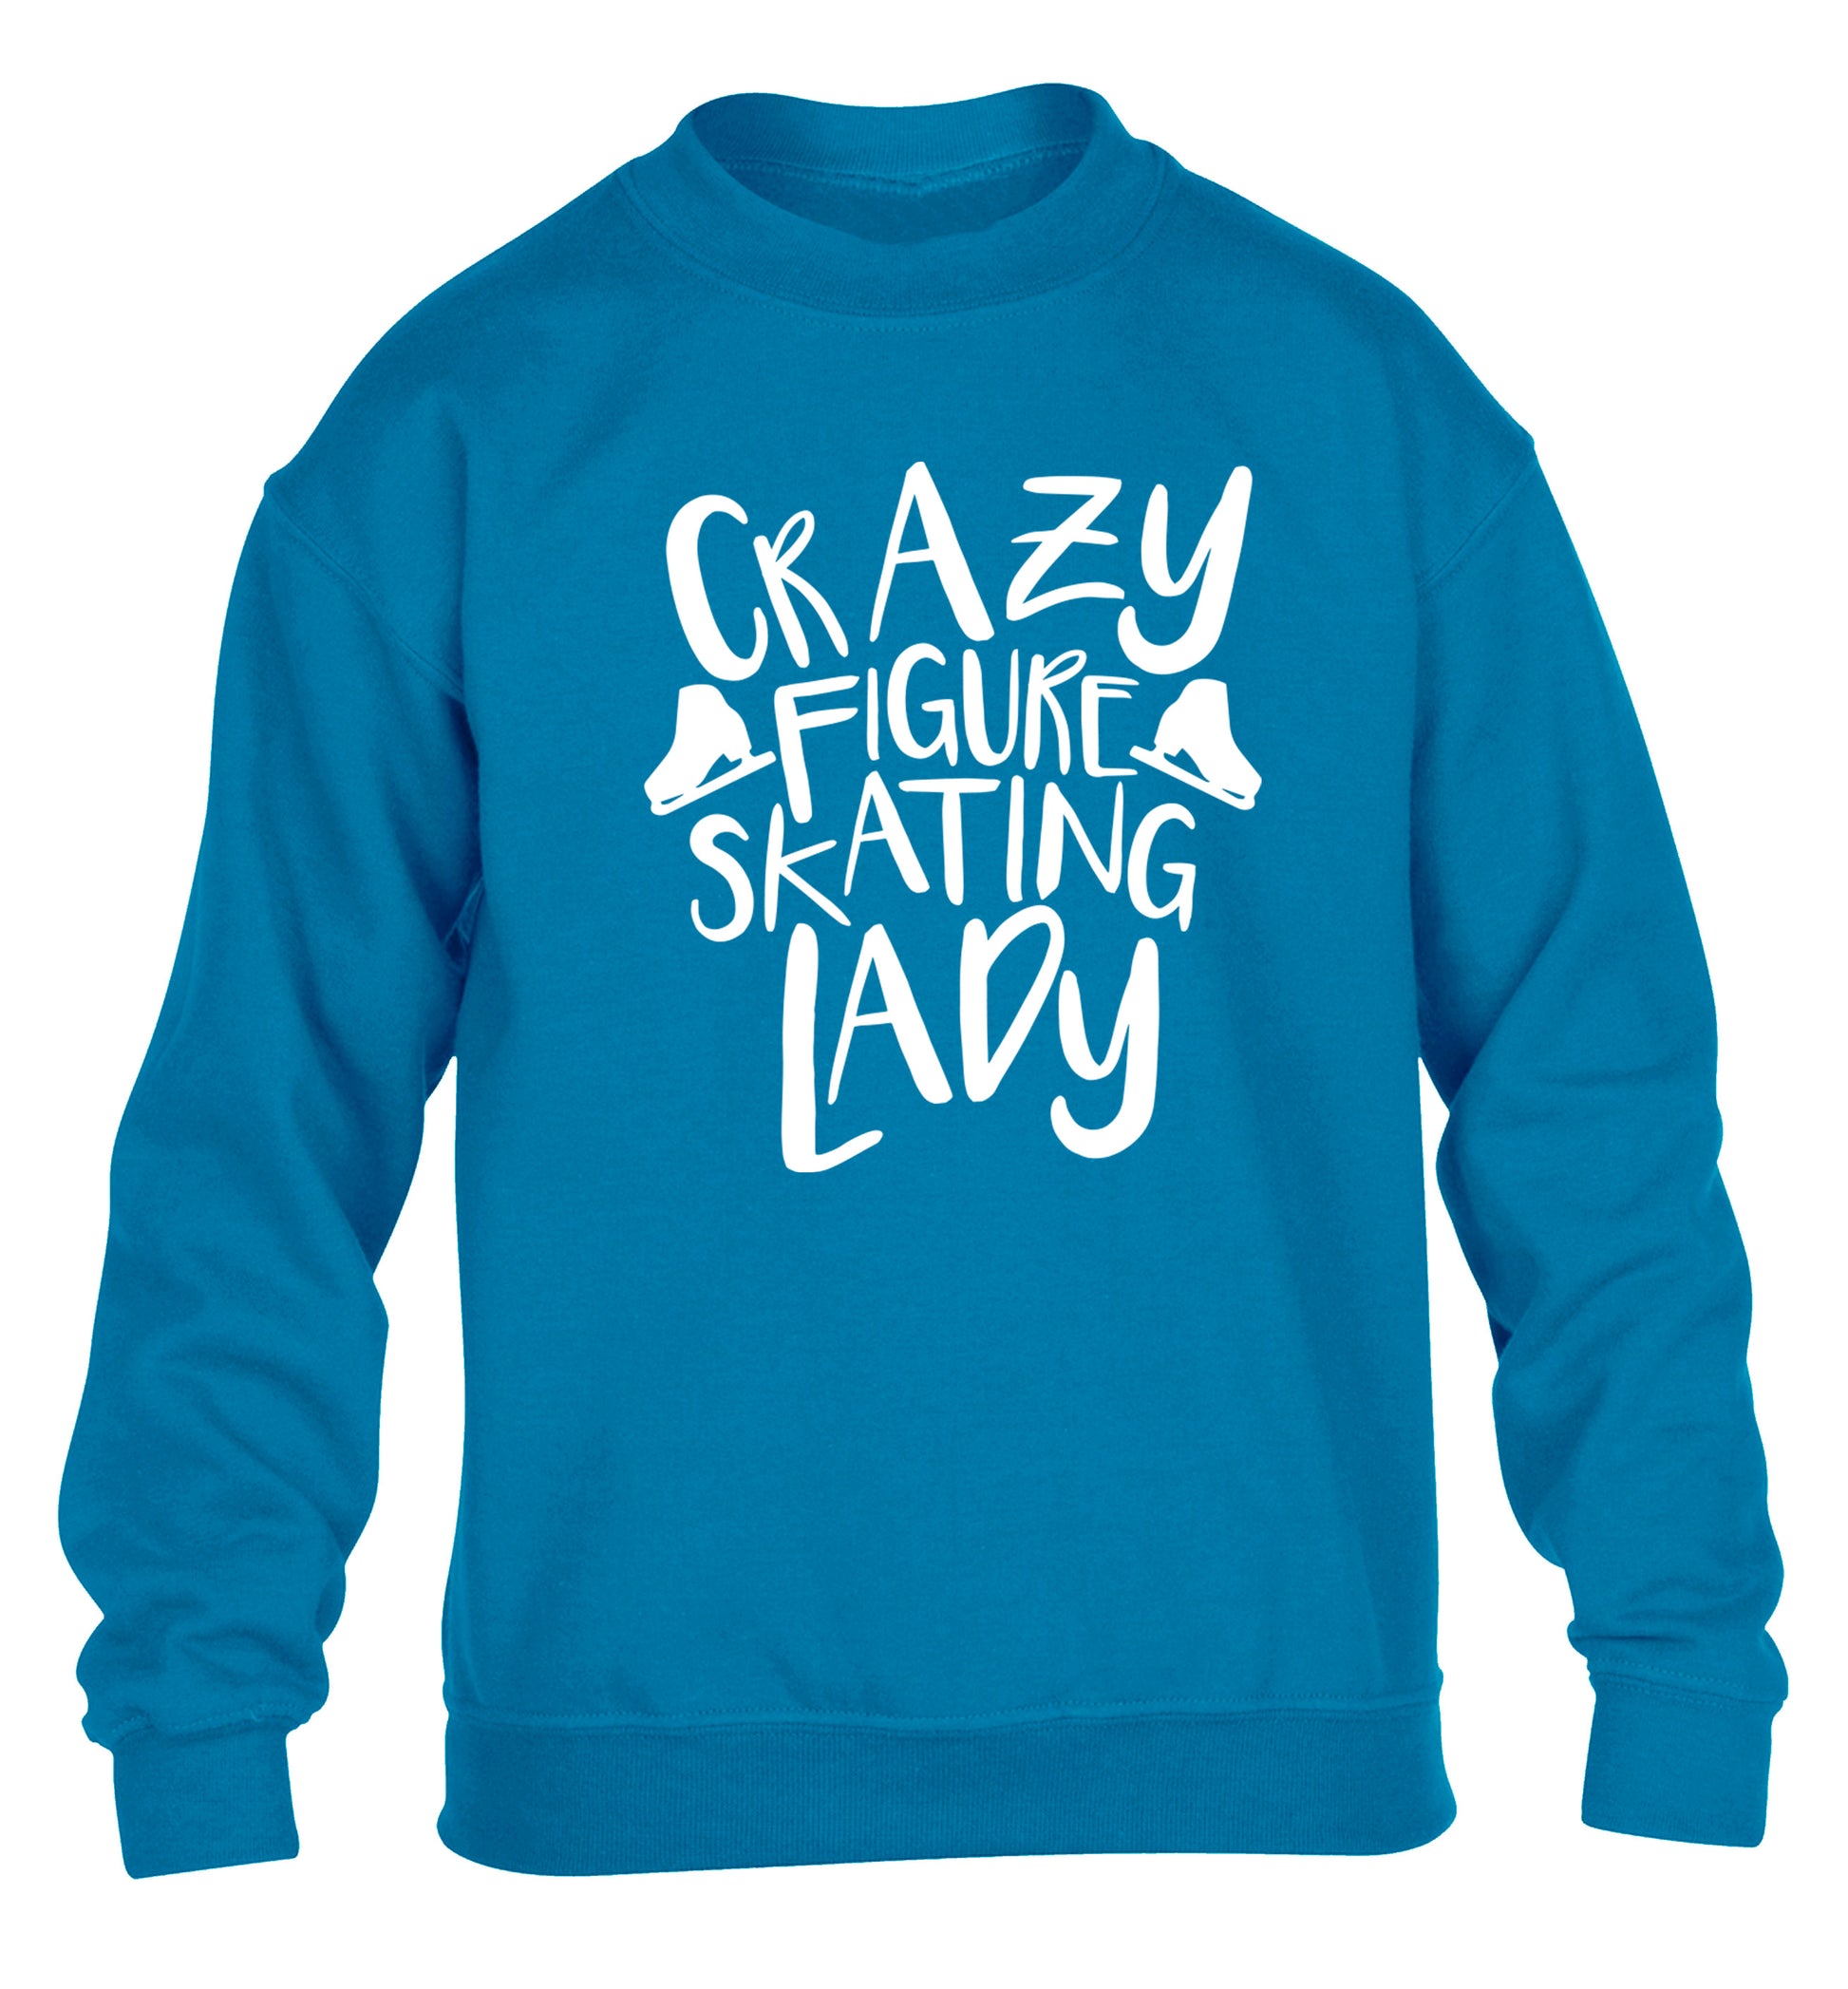 Crazy figure skating lady children's blue sweater 12-14 Years